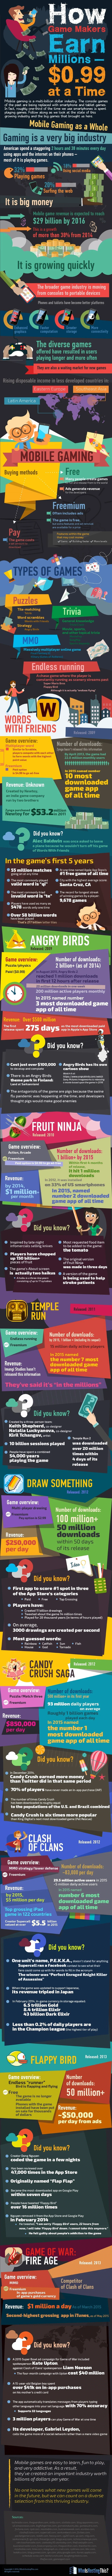 How Game Makers Earn Millions — 99¢ at a Time - #infographic